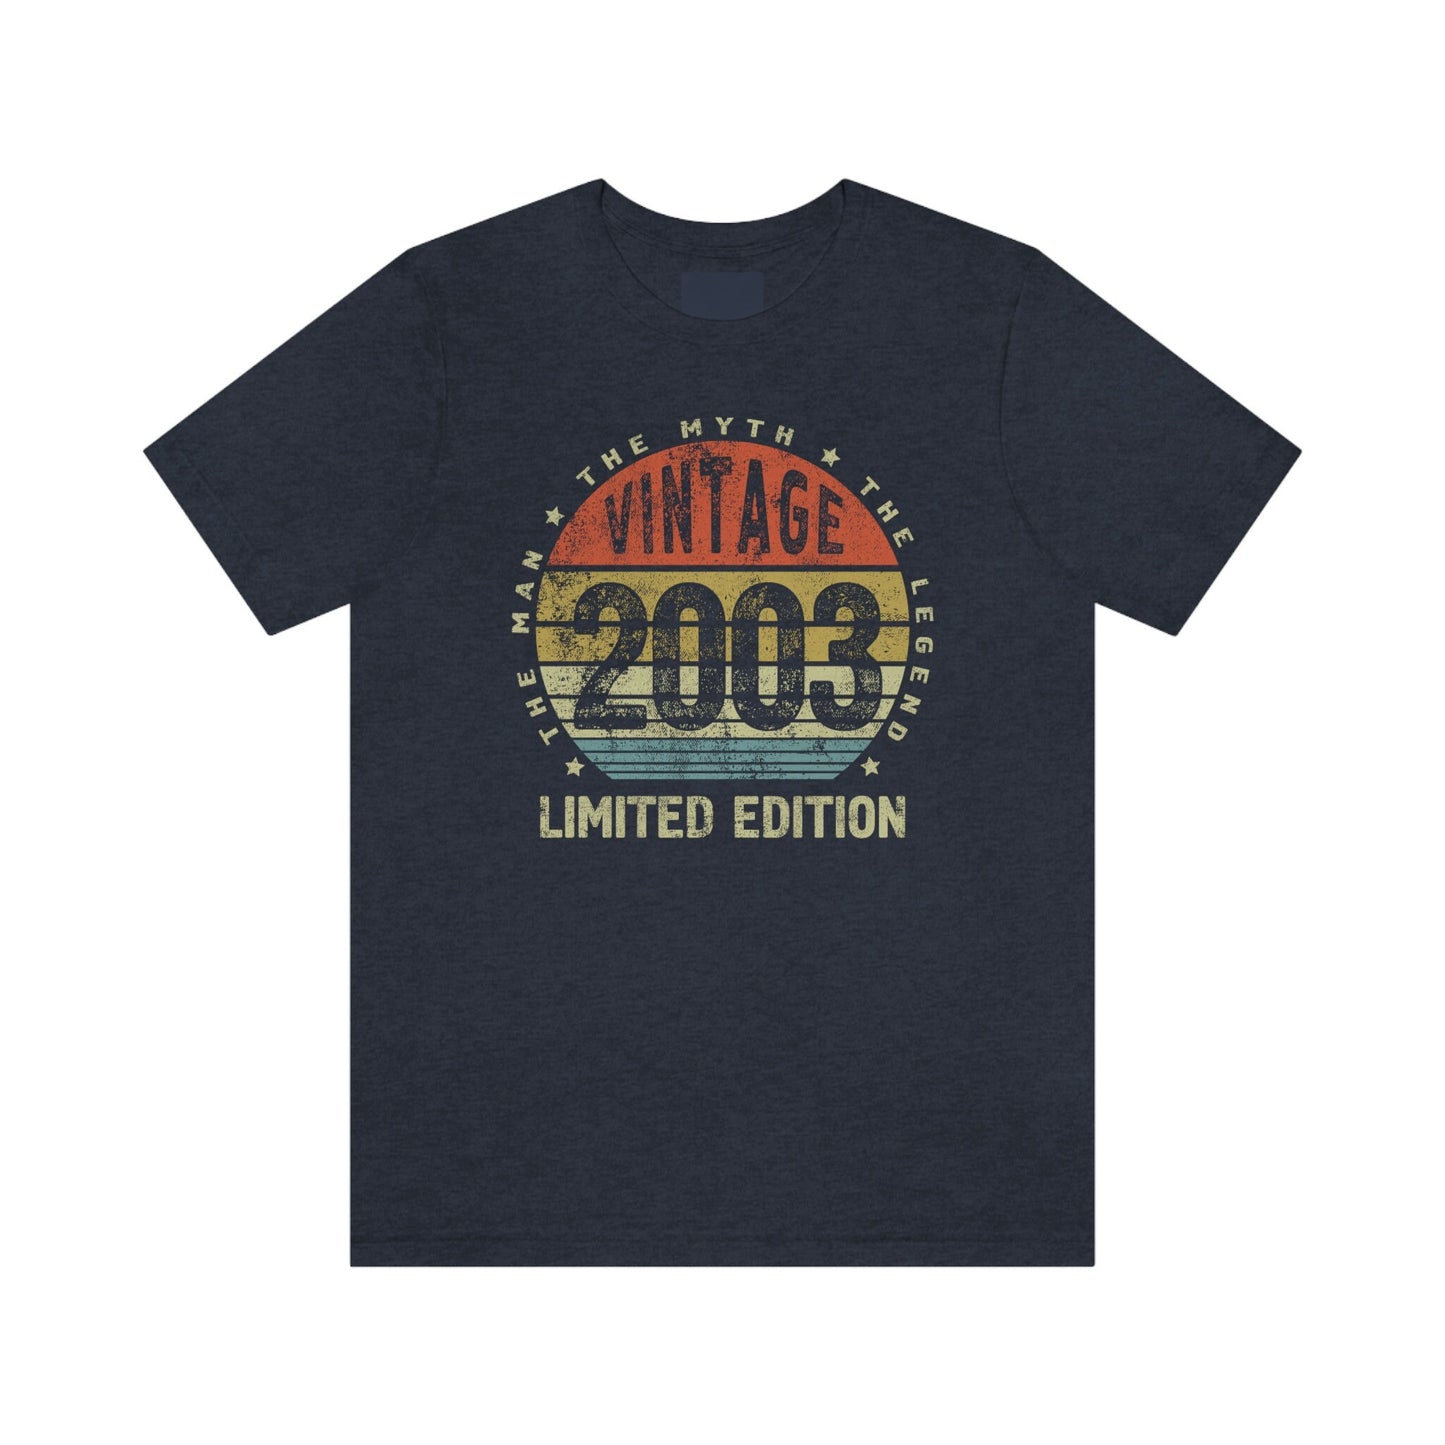 Vintage 2003 Birthday Gift Shirt for Son or Daughter, Limited Edition t-shirt for boy or girl